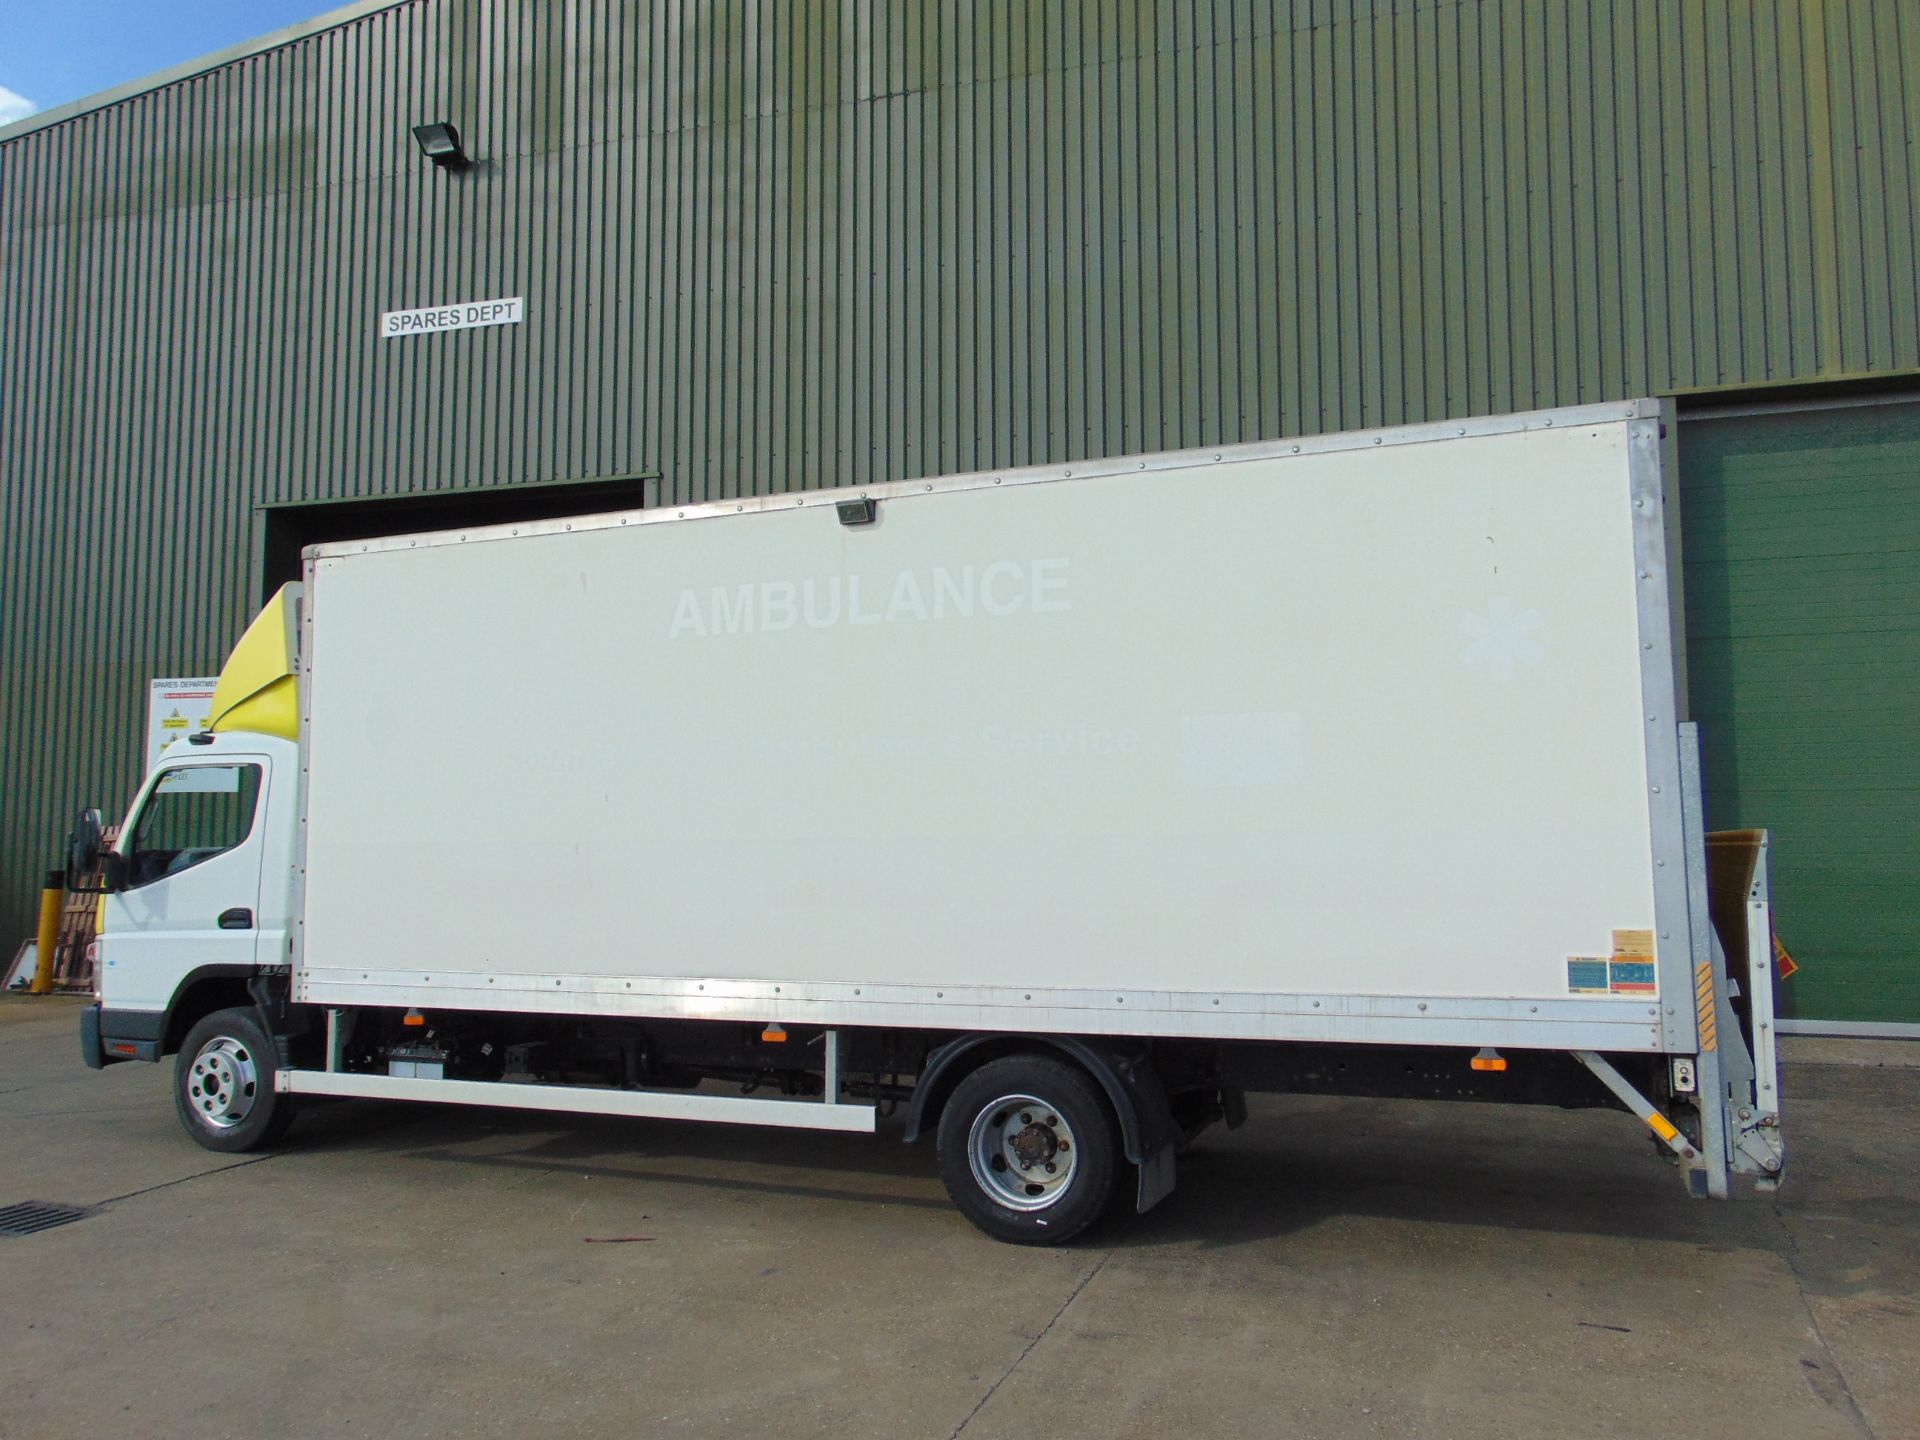 2011 Mitsubishi Fuso Canter Box lorry 7.5T - Only 5400 Miles! - Image 6 of 51